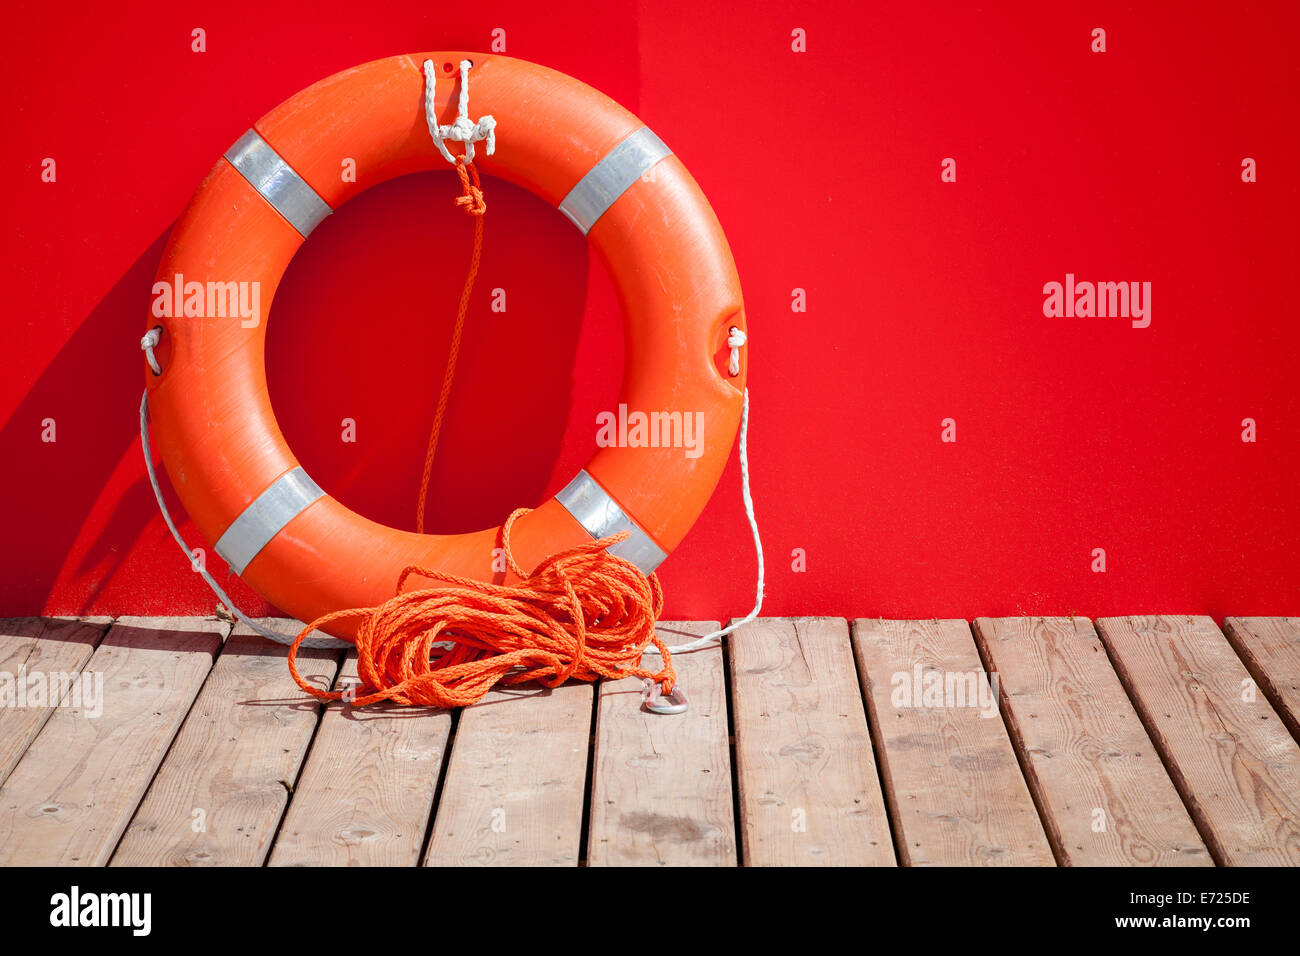 Lifebuoy stands on wooden floor nearby red wall of lifeguard station Stock Photo